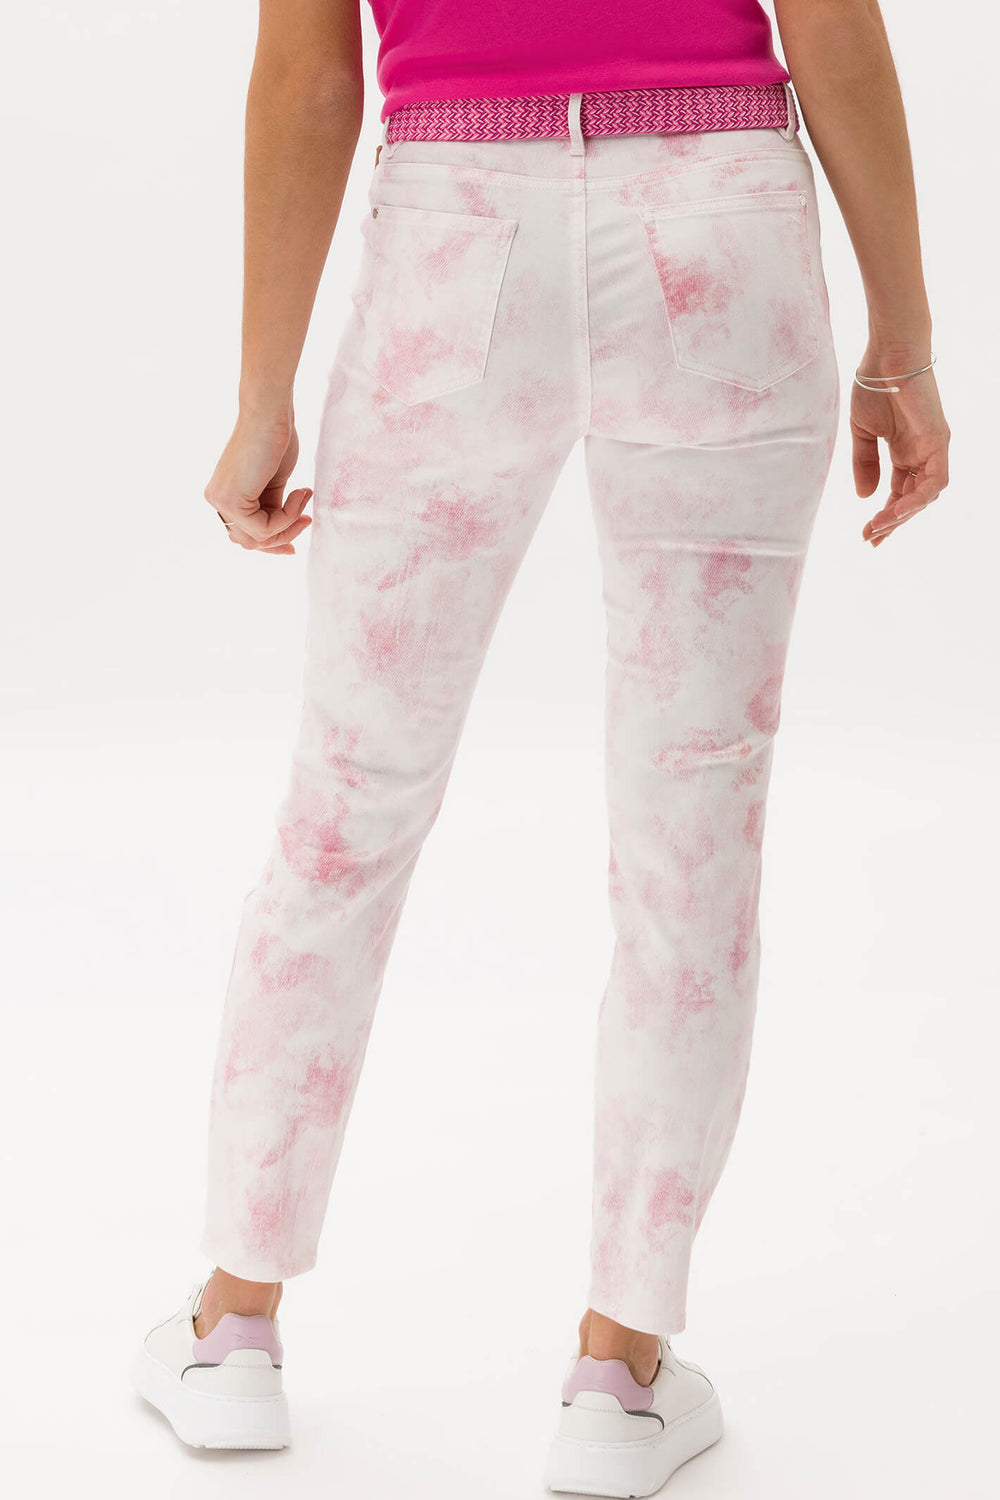 Brax 72-6078 87 Shakira S French Rose Patterned Skinny Fit Jeans - Shirley Allum Boutique